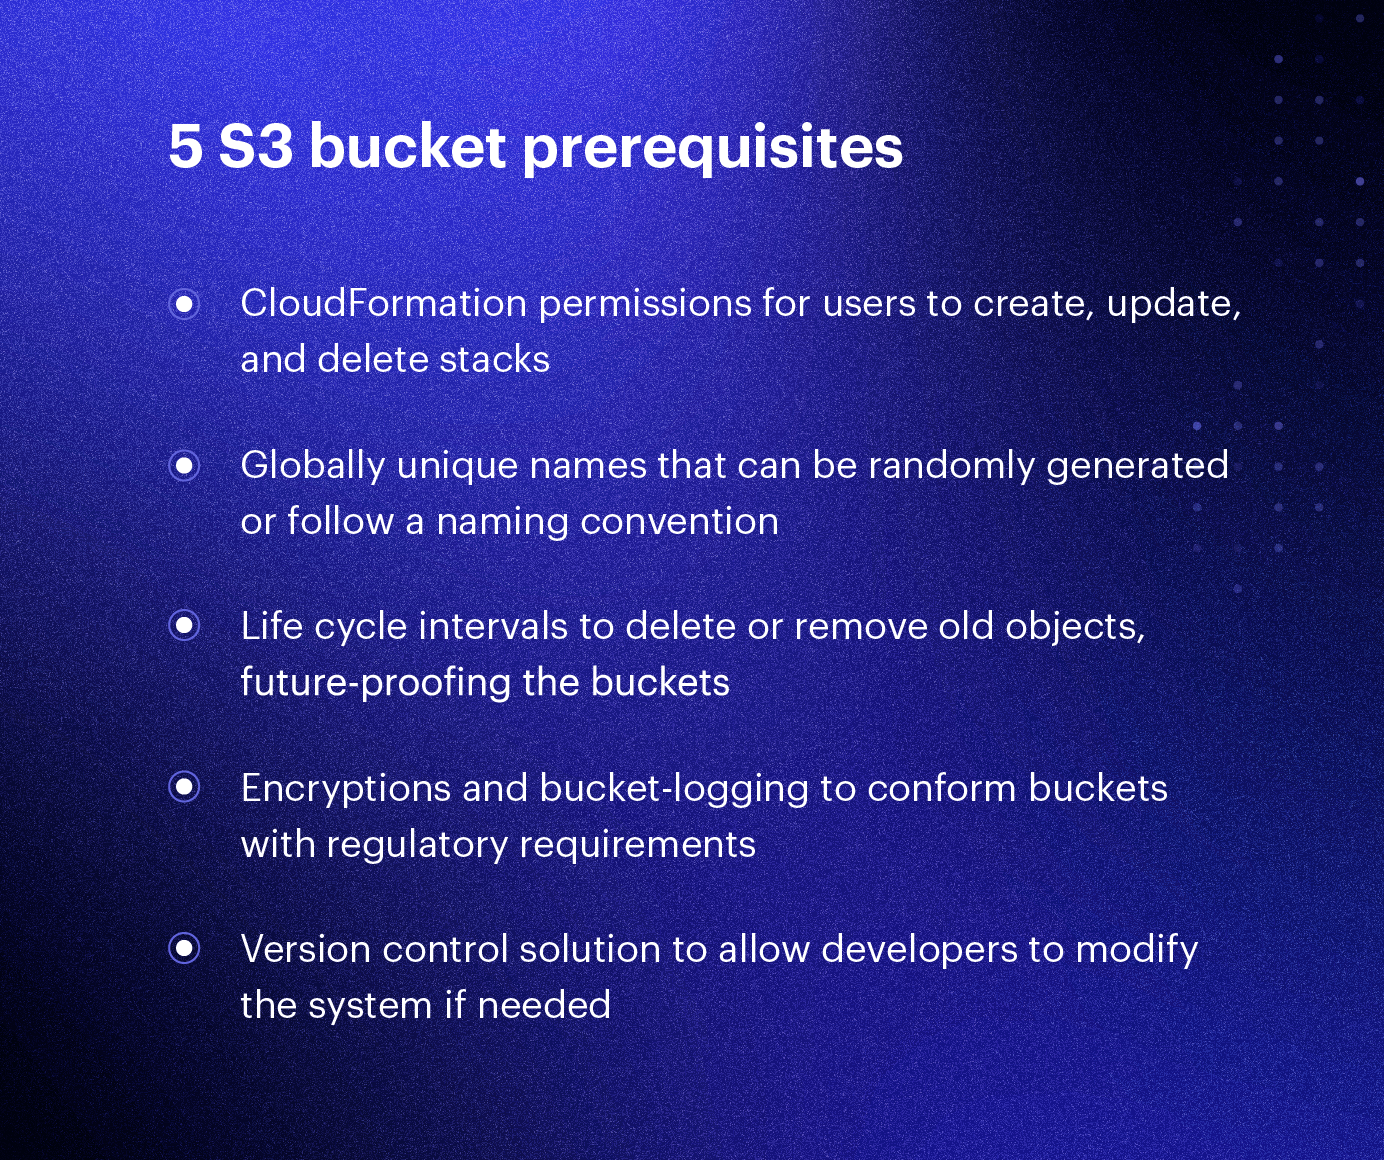 S3 bucket prerequisites: 1) CloudFormation permissions for users to create, update and delete stacks. 2) Globally unique names that can be randomly generated or follow a naming convention. 3) Life cycle intervals to delete or remove old objects, future-proofing the buckets. 4) Encryptions and bucket-logging to conform buckets with regulatory requirement. 5) Version control solution to allow developers to modify the system if needed